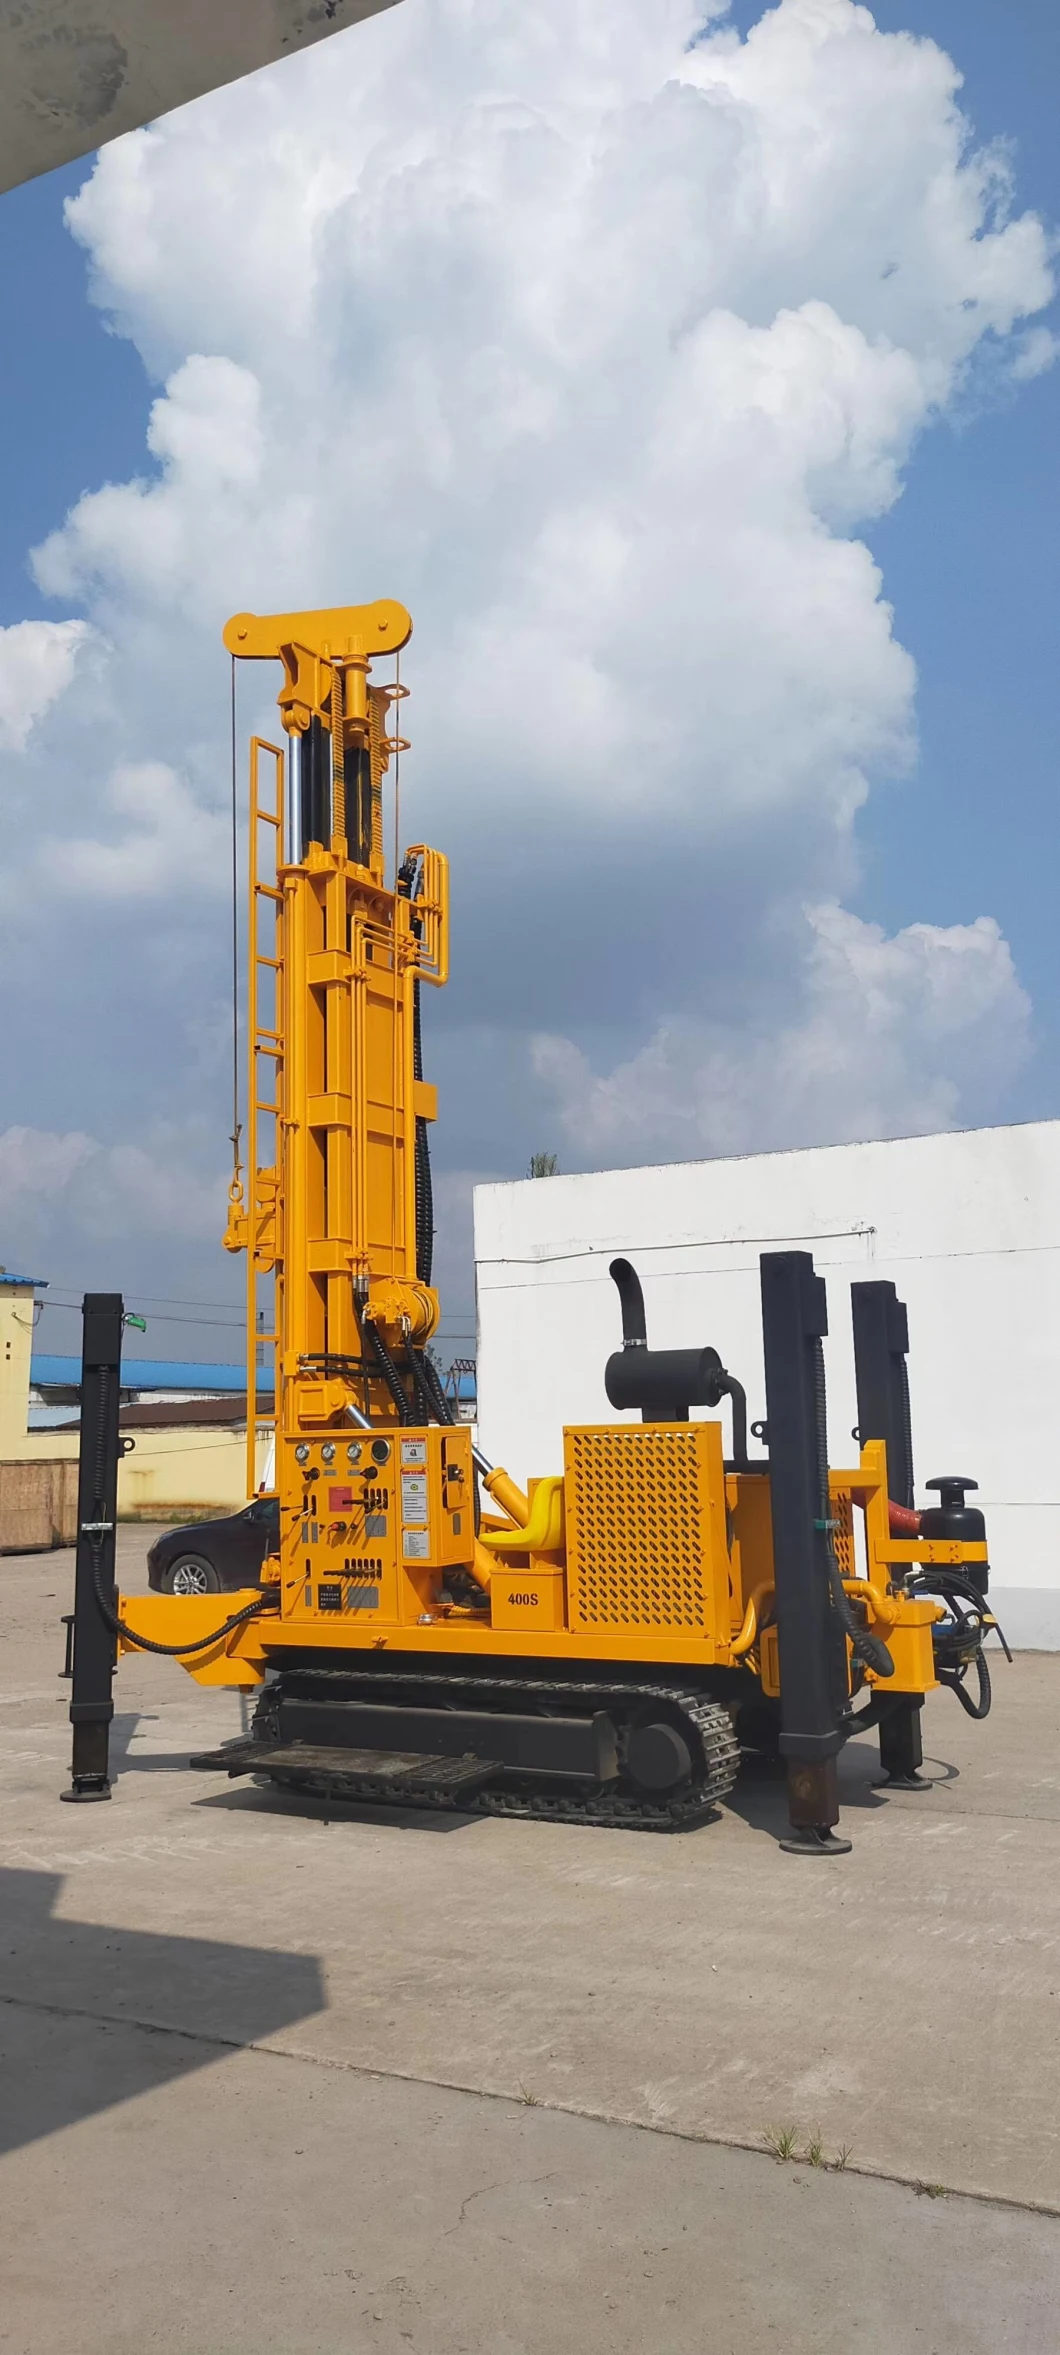 Gl400s Water Rig Drilling Machine 400m Underground Water Well Drill/Drilling Rig Prices